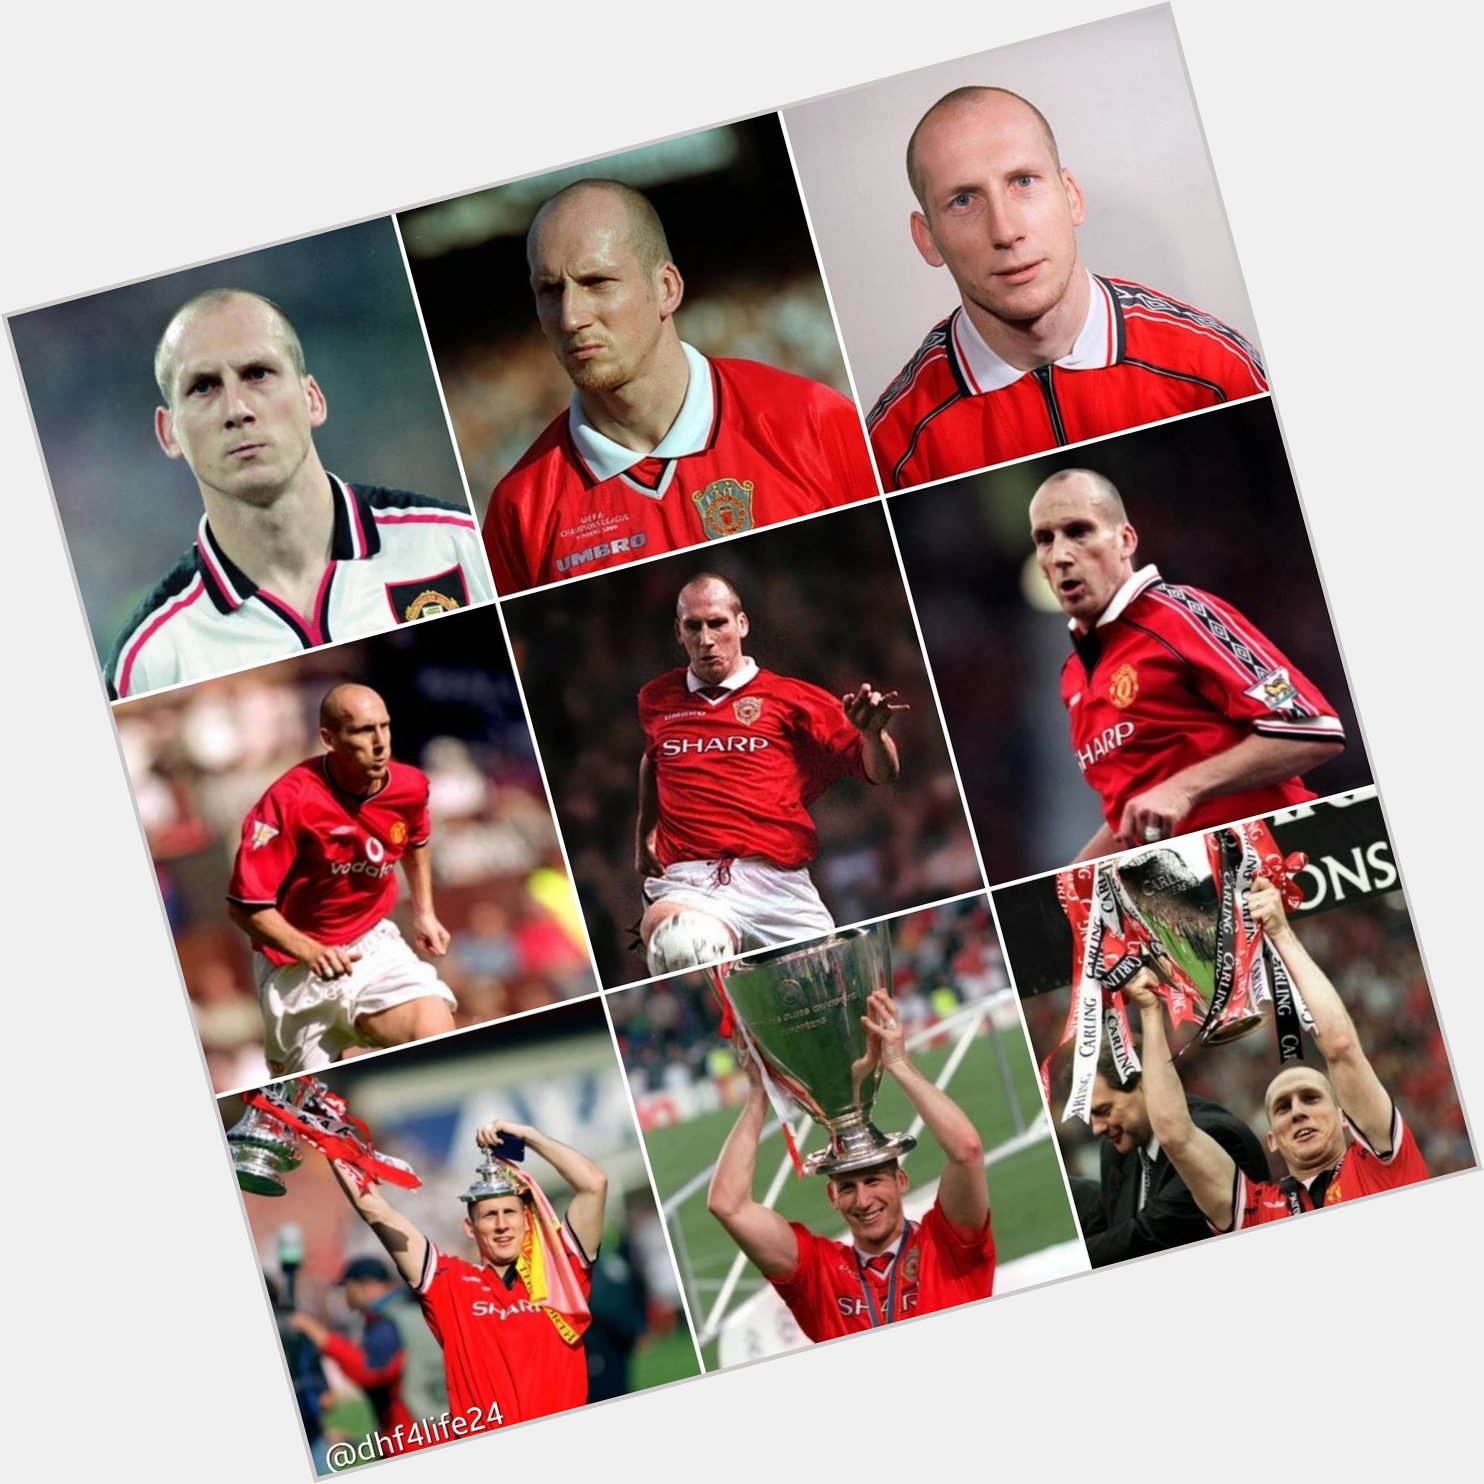 Happy 50th Birthday   on 17th July 2022 to Jaap Stam  - What a Player and LEGEND... 